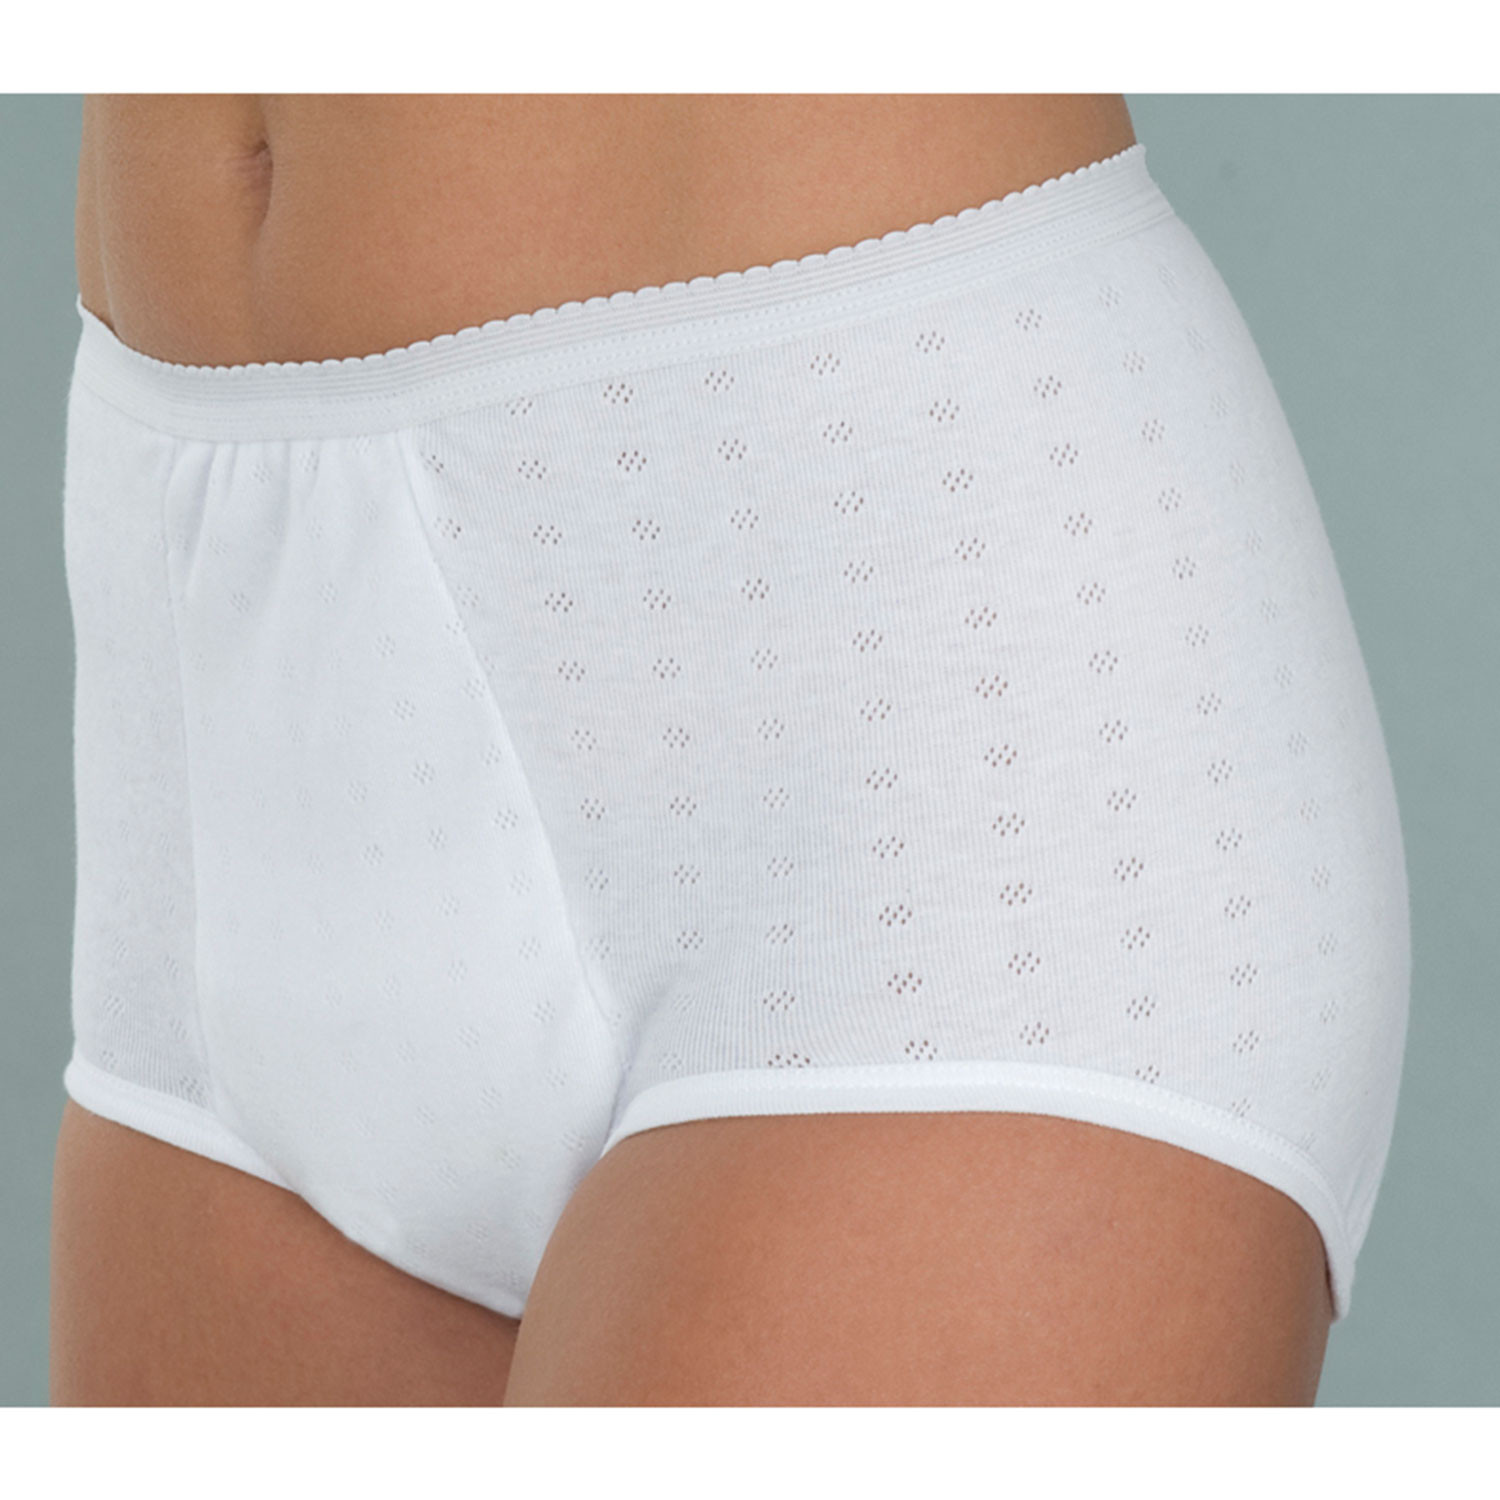 Wearever floral fancy incontinence panties from www.dryp.shop - AssistData